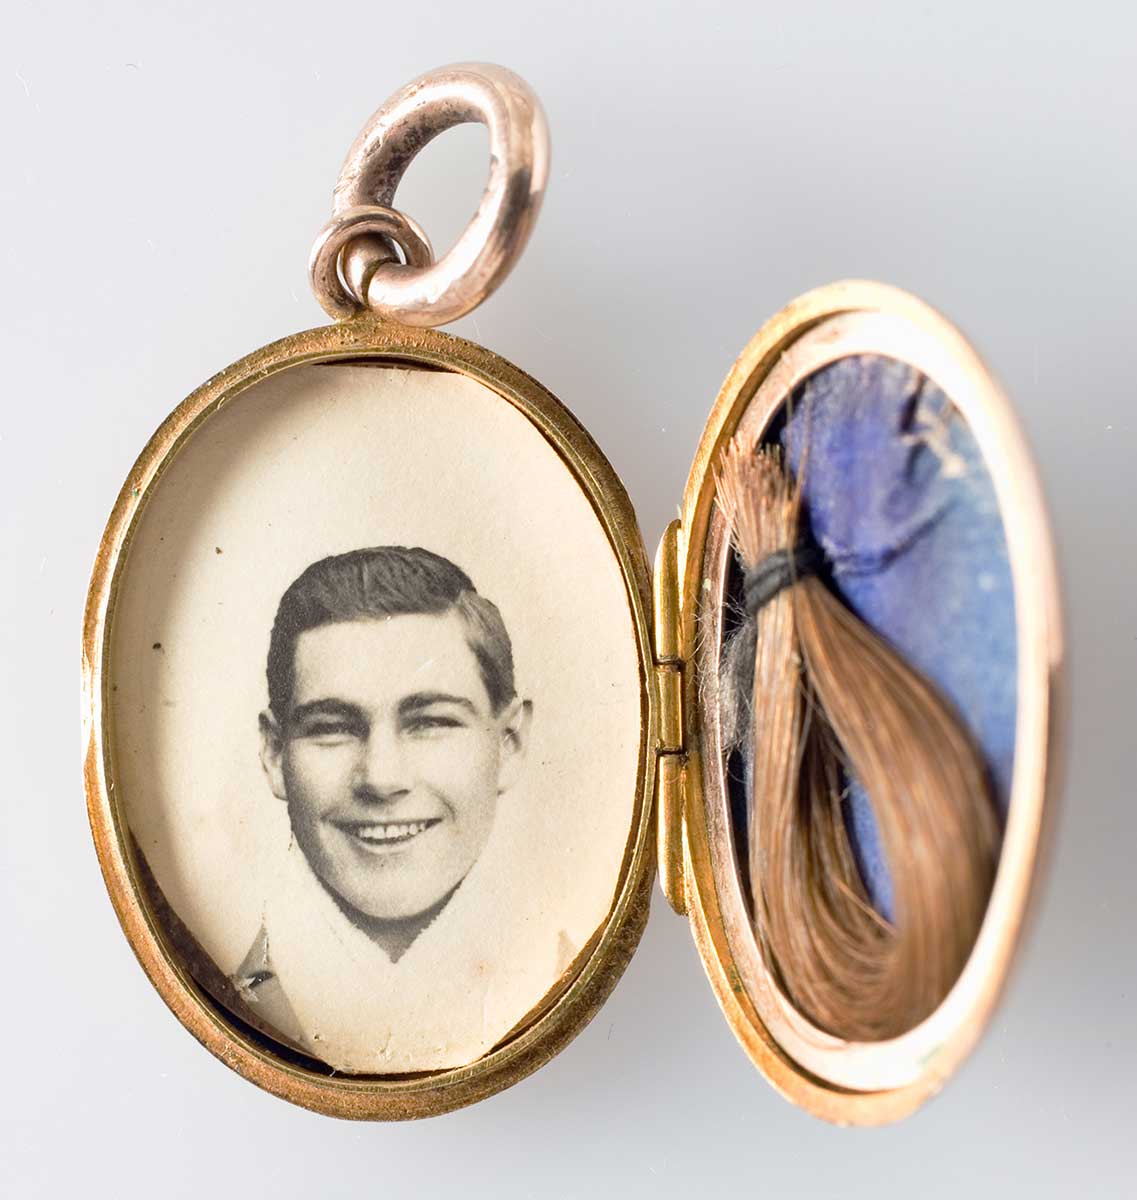 Images of the mourning locket, open and revealing a photo of Les Darcy (on left) and a lock of his hair on a blue background (on right). - click to view larger image